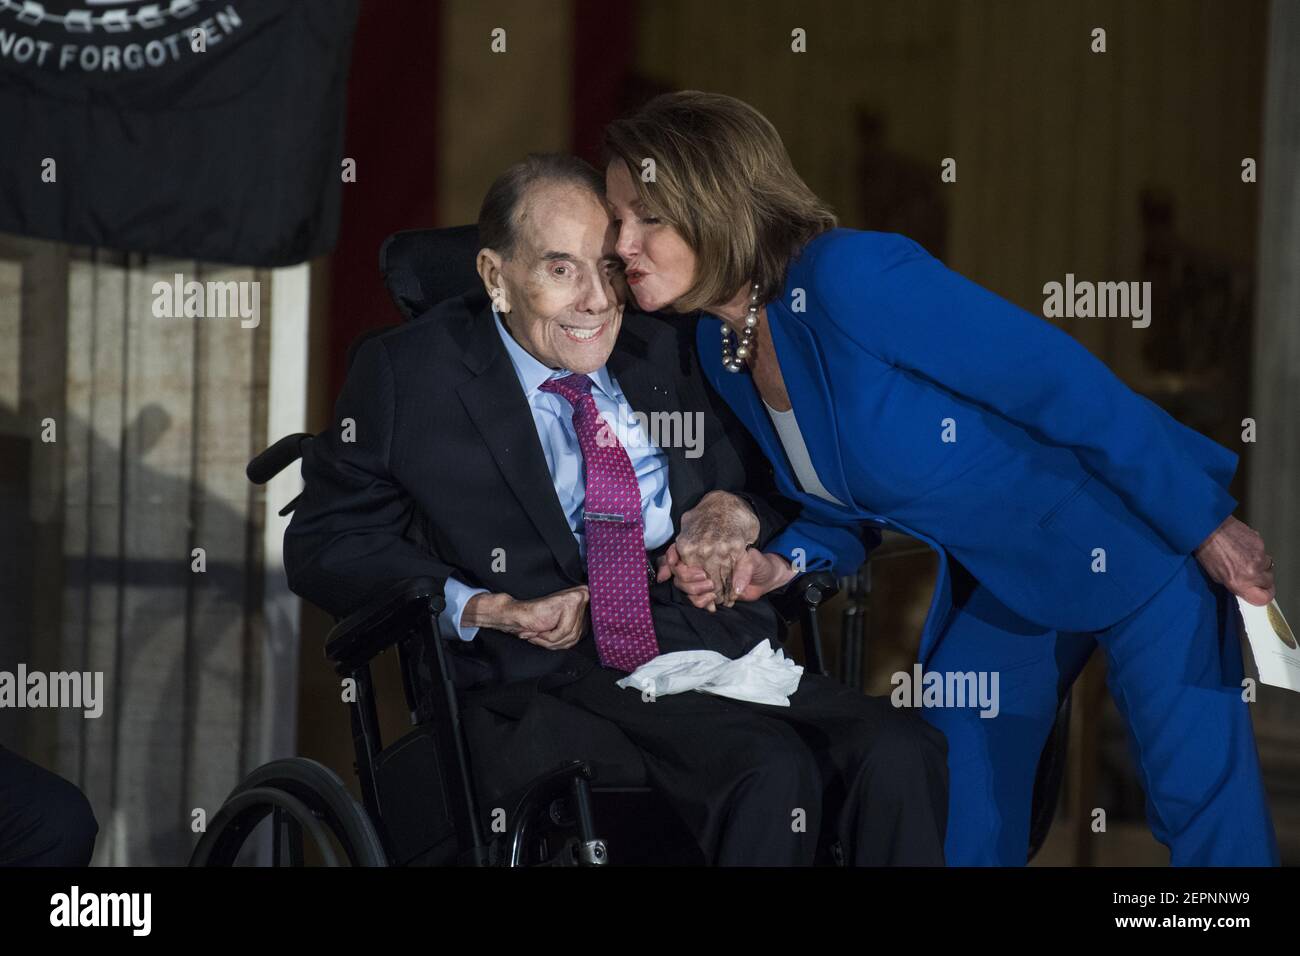 UNITED STATES - JANUARY 17: House Minority Leader Nancy Pelosi, D-Calif., greets former Sen. Bob Dole, R-Kan., during a Congressional Gold Medal ceremony in the Capitol rotunda to honor Dole as a "soldier, legislator, and statesman," on January 17, 2018. (Photo By Tom Williams/CQ Roll Call) Stock Photo